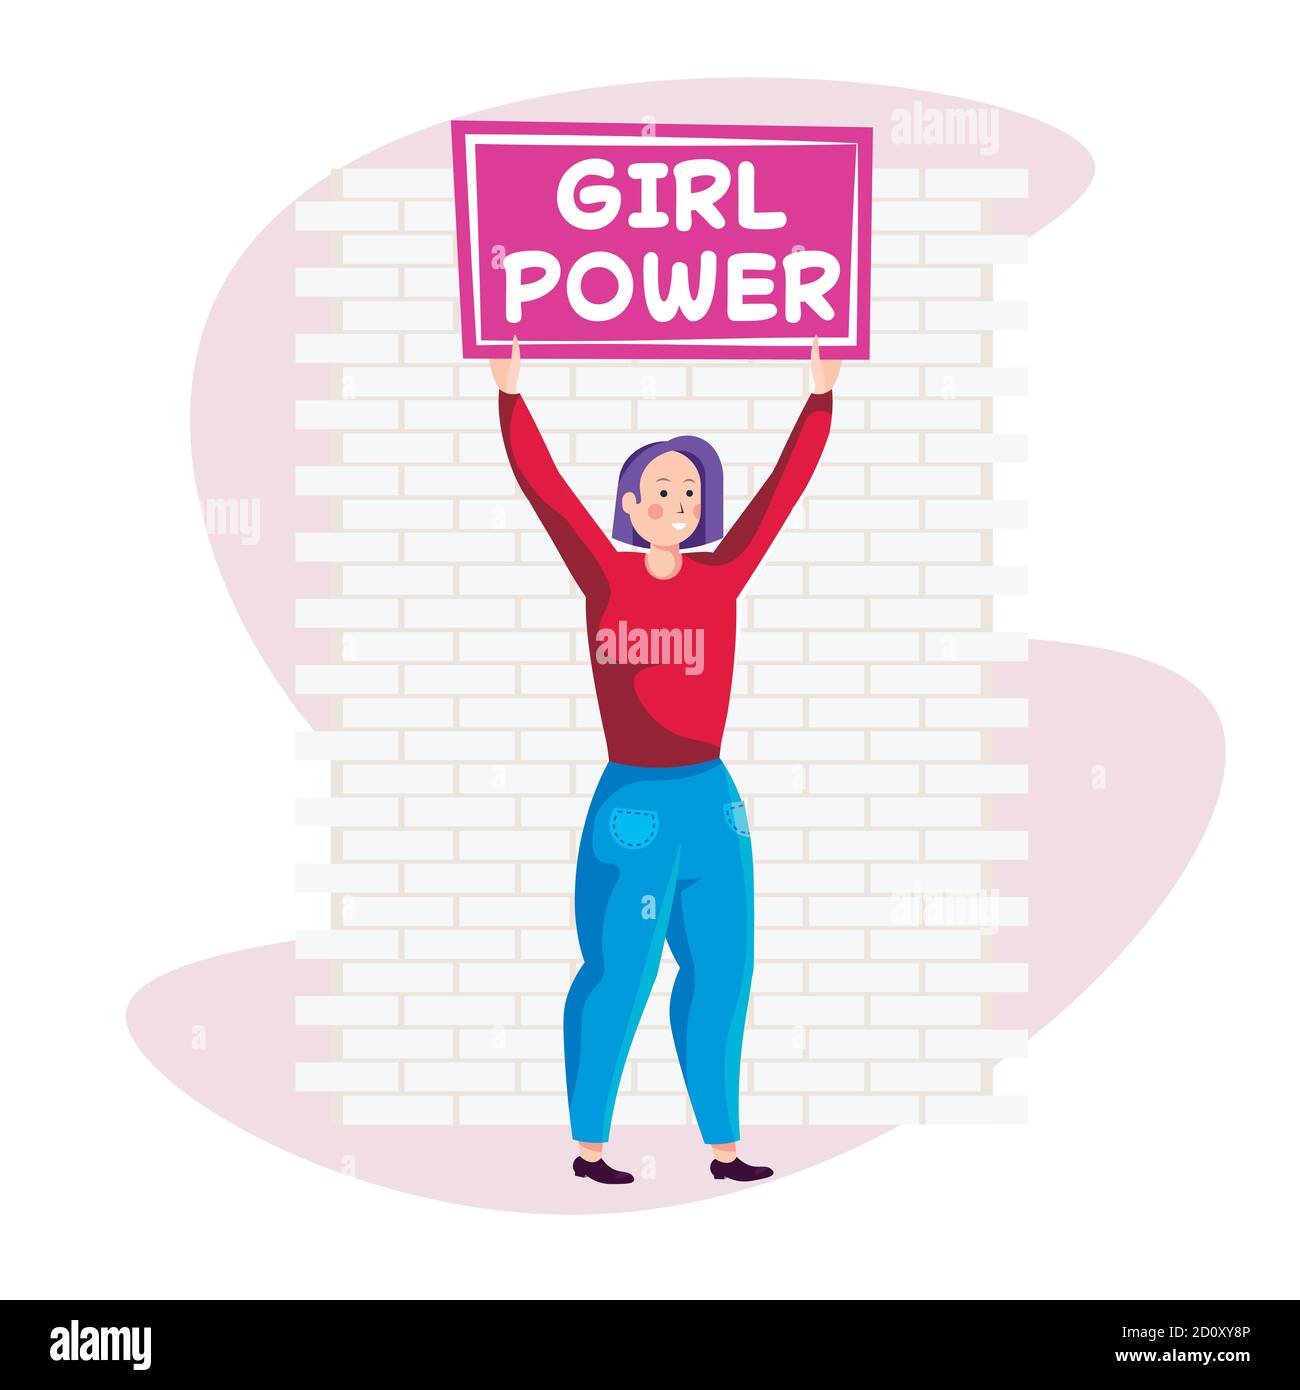 Women empowerment poster Cut Out Stock Images & Pictures - Alamy